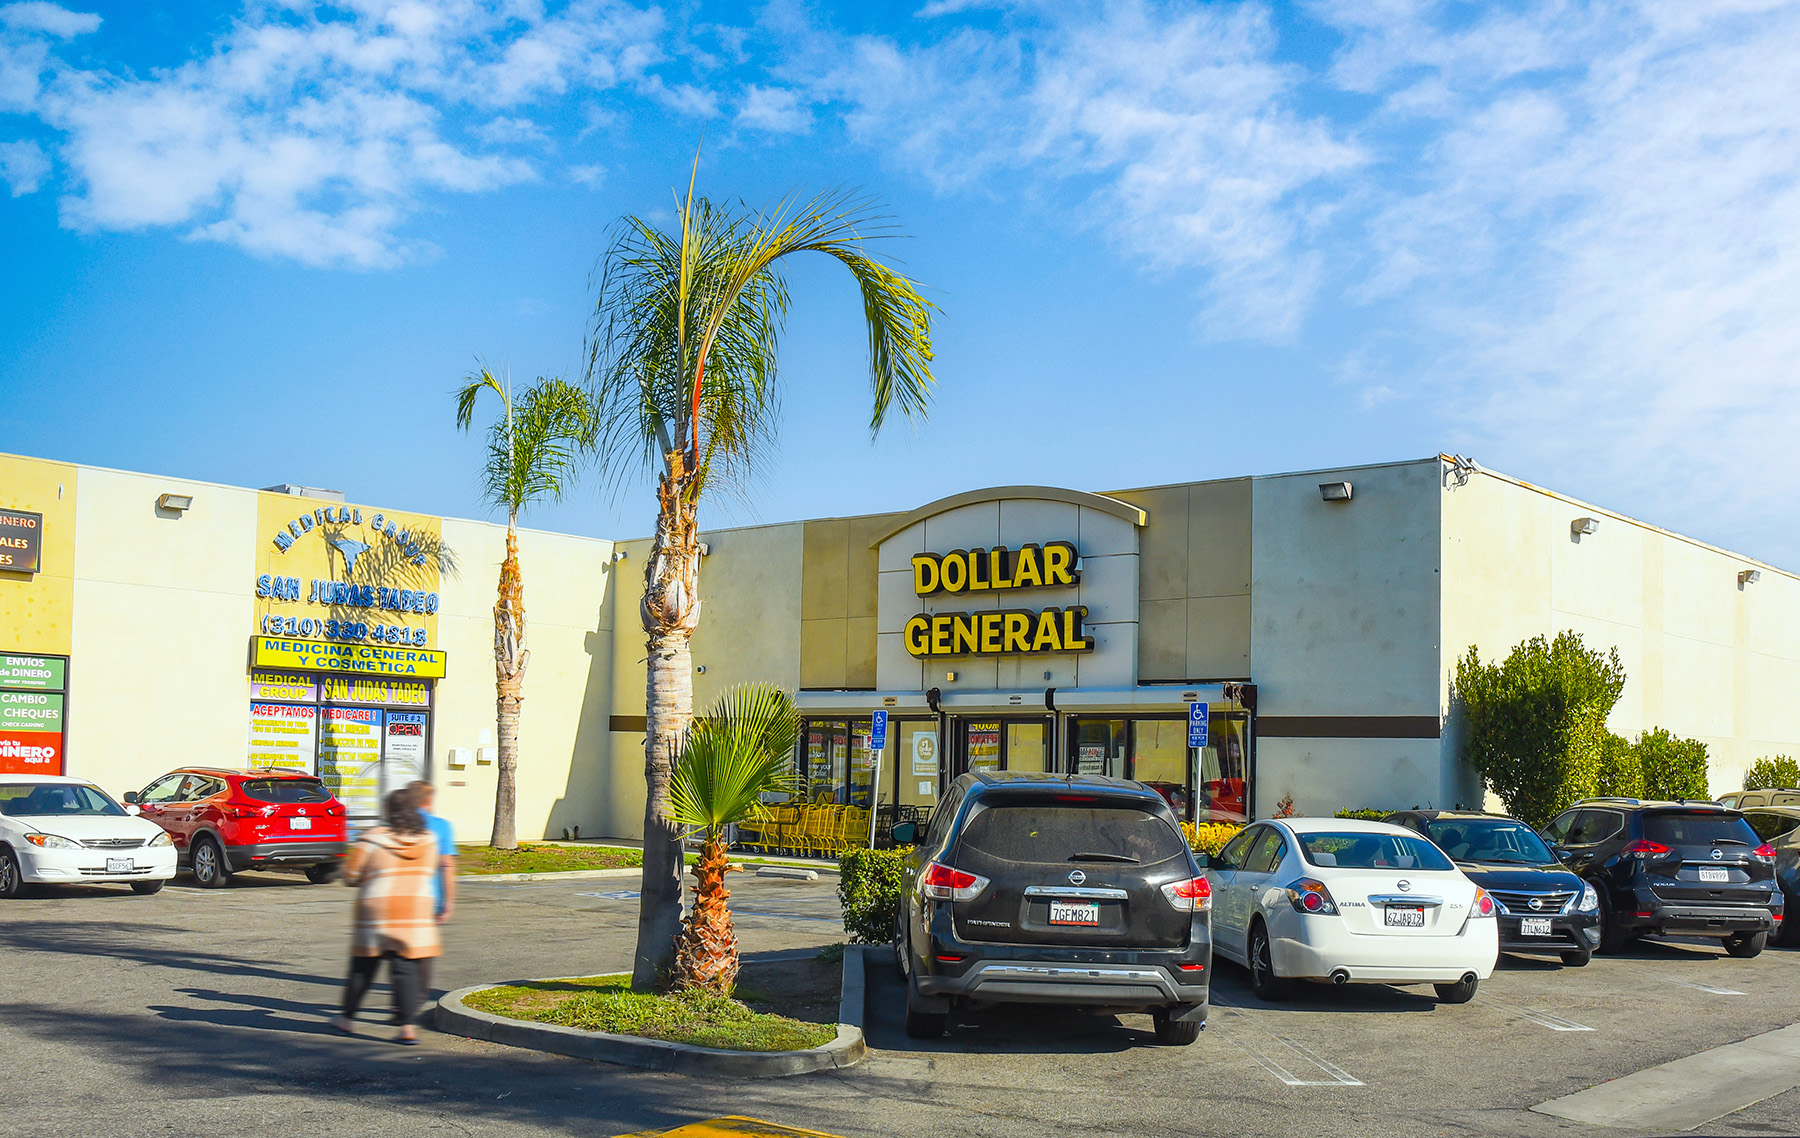 Hanley Investment Group Arranges Sale of Dollar General-Anchored Shopping Center in Los Angeles County for $4.15 Million